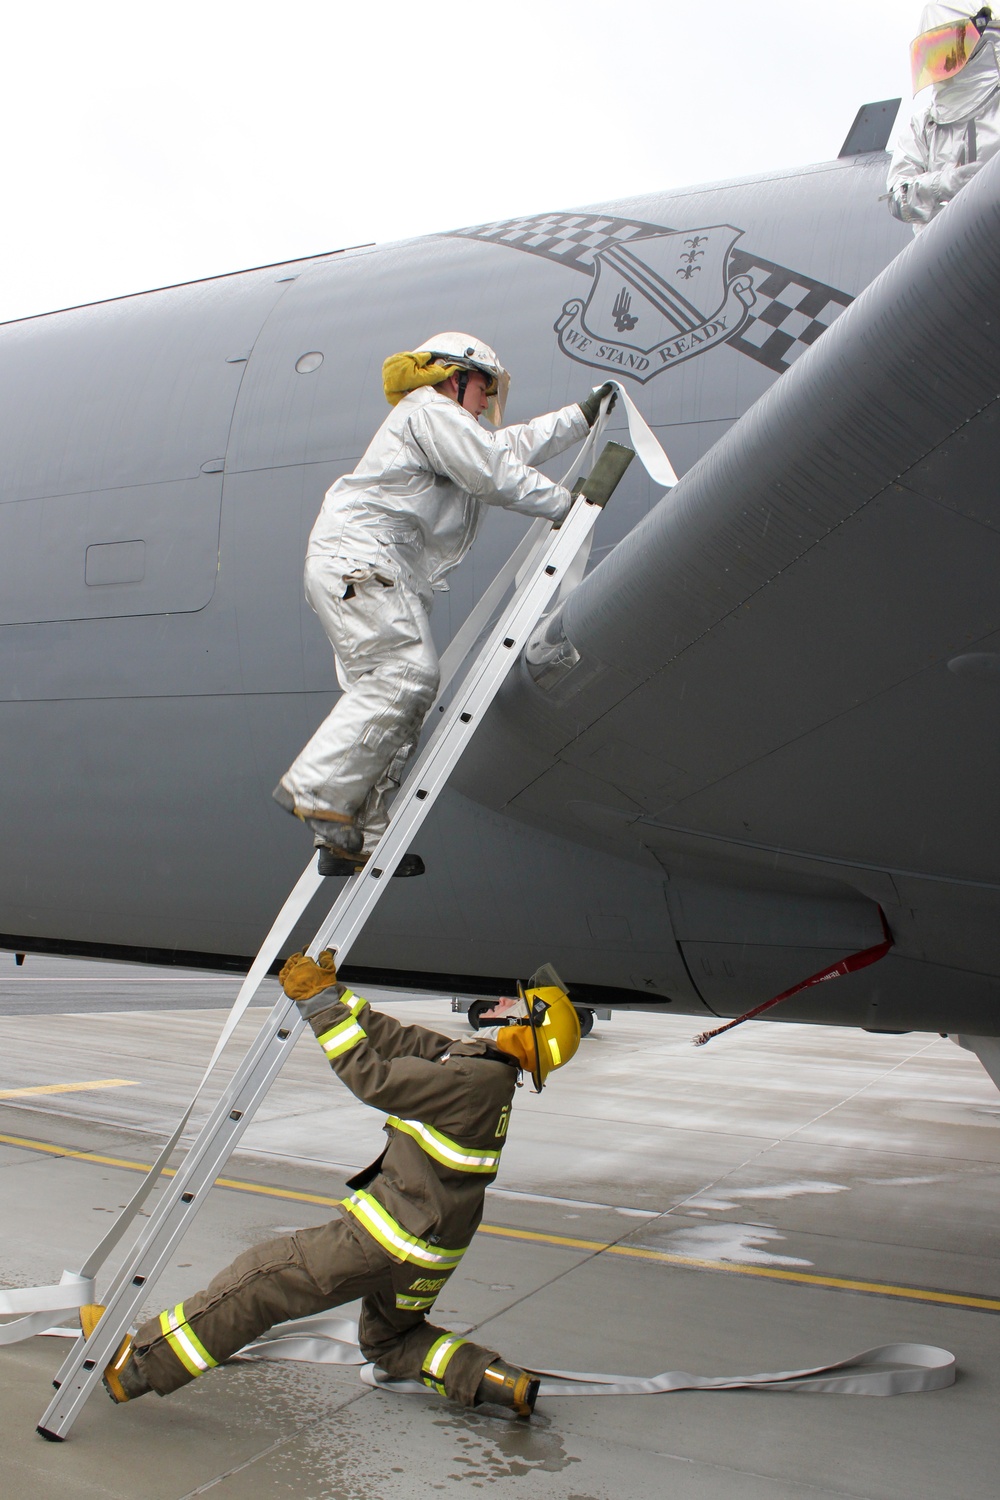 Michigan Air National Guard deploys to Estonia in support of Saber Strike 2012